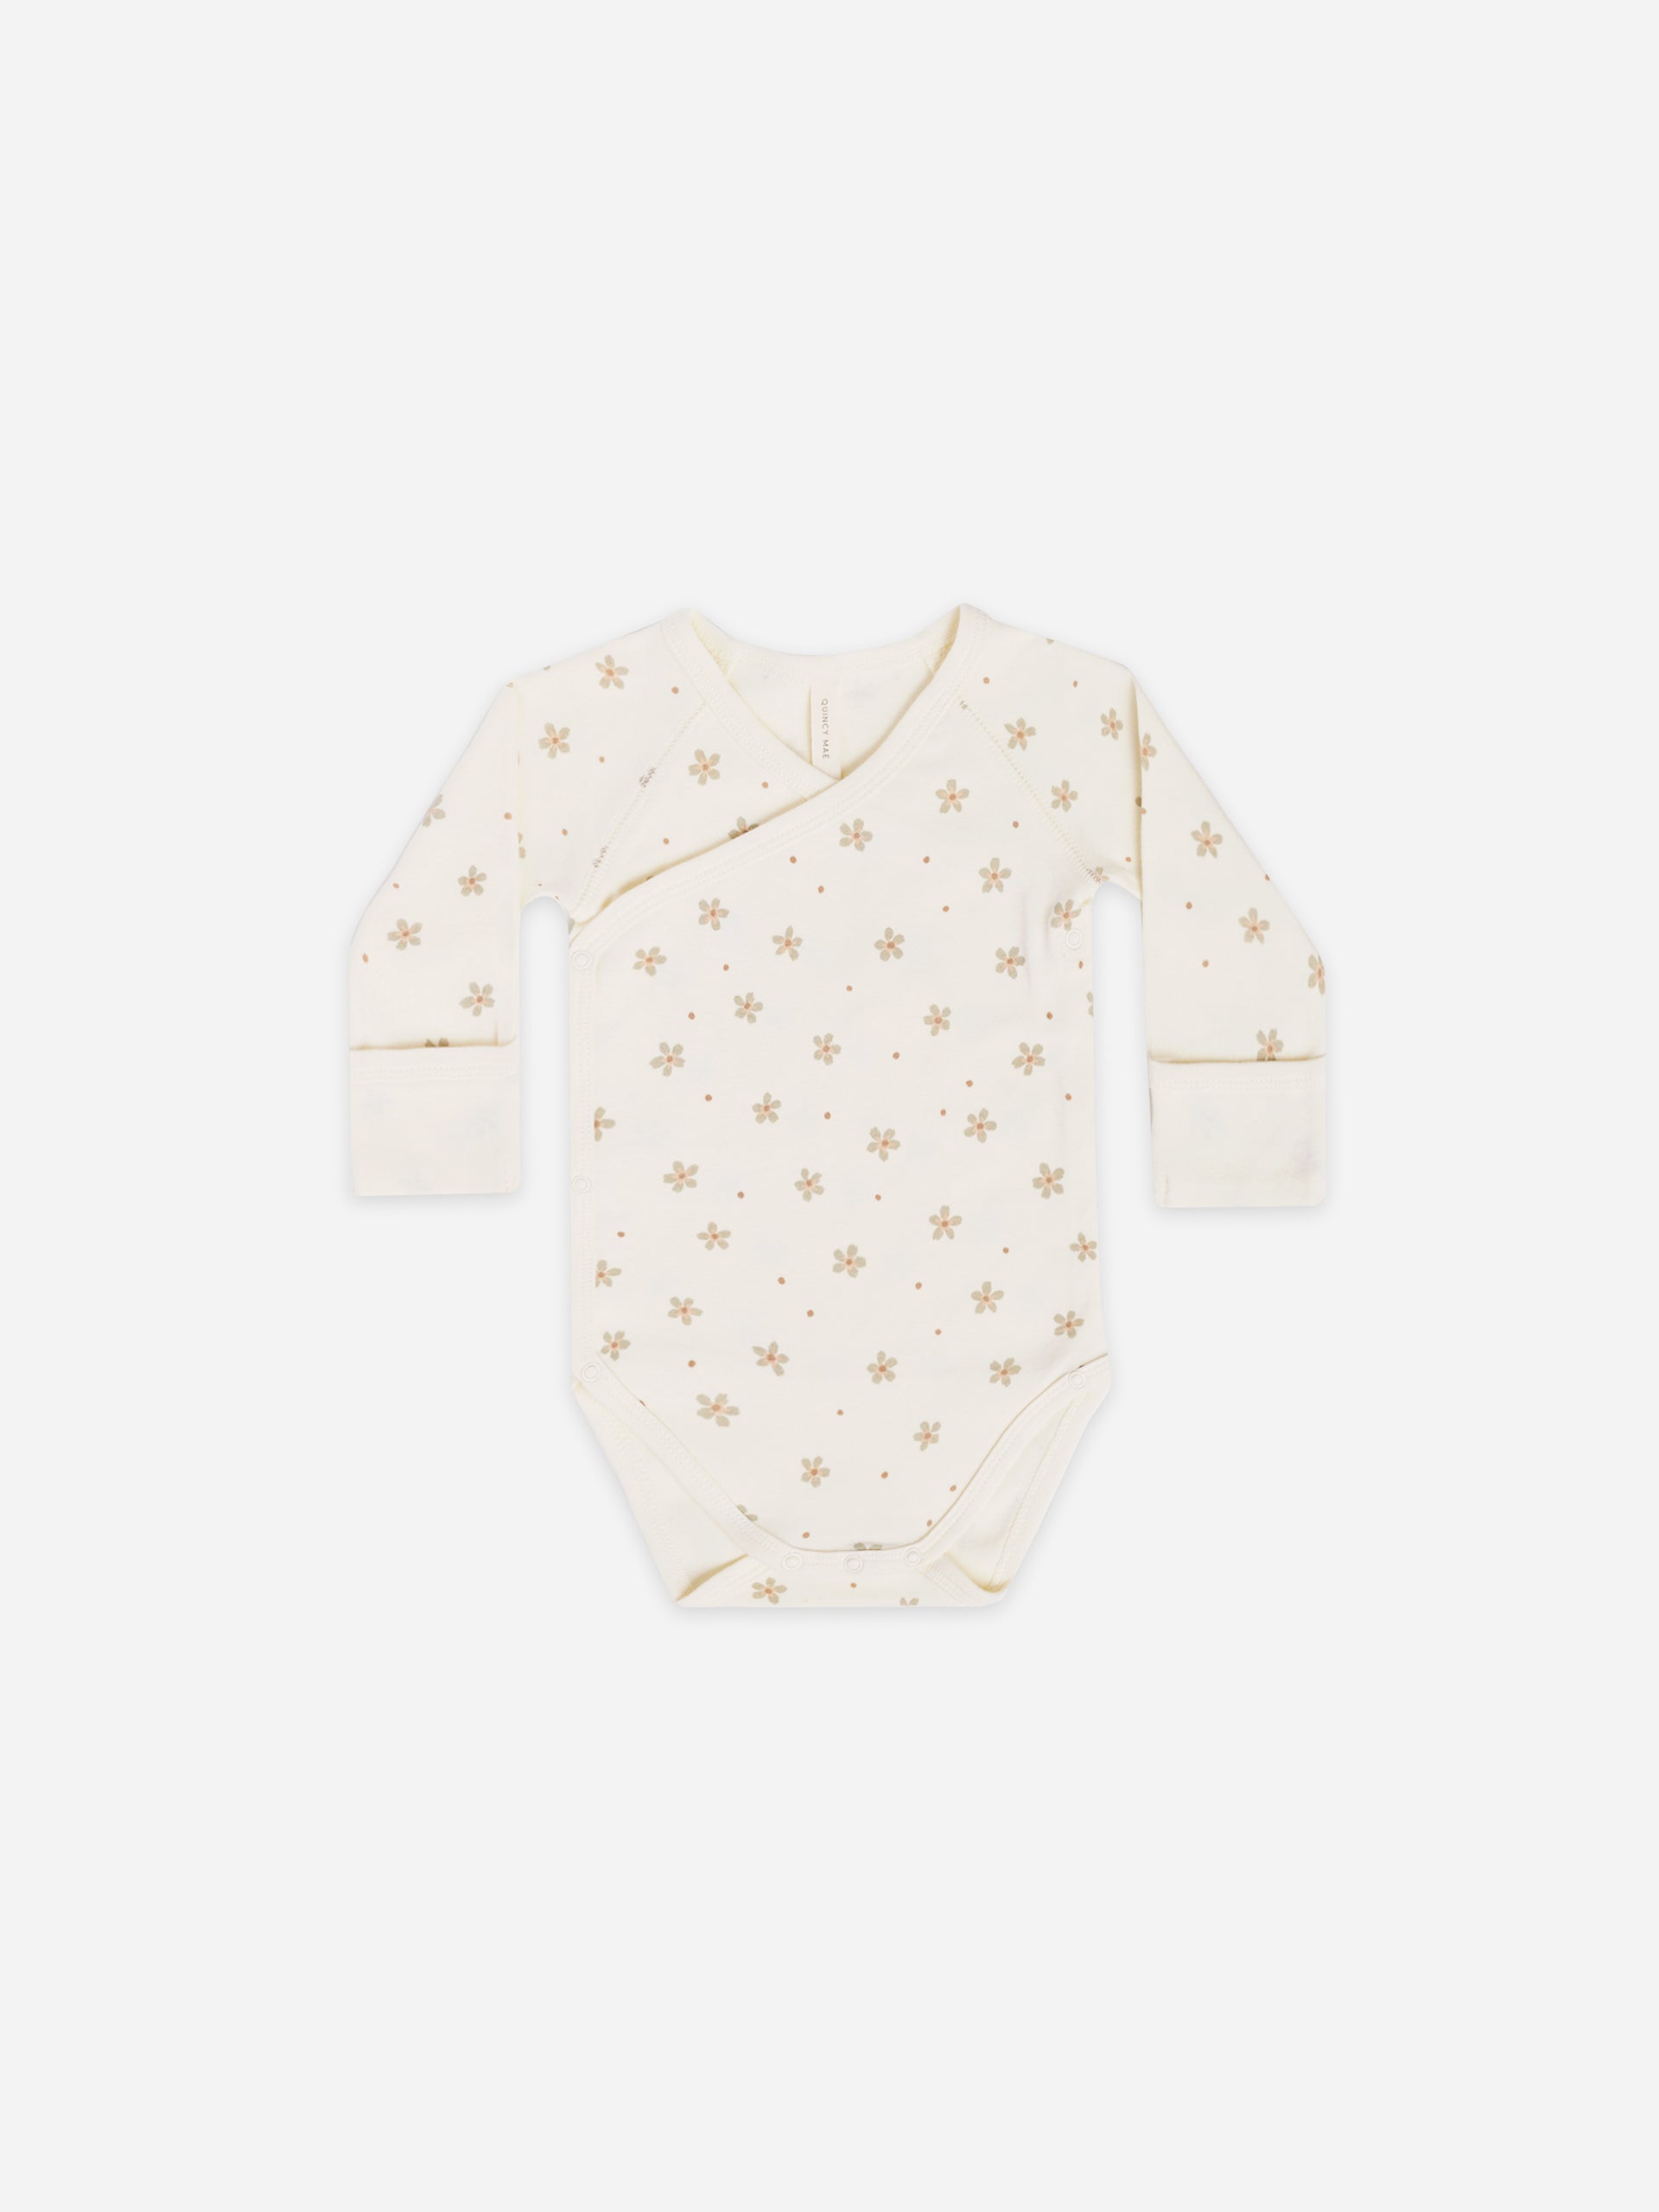 side snap bodysuit | dotty floral - Quincy Mae | Baby Basics | Baby Clothing | Organic Baby Clothes | Modern Baby Boy Clothes |